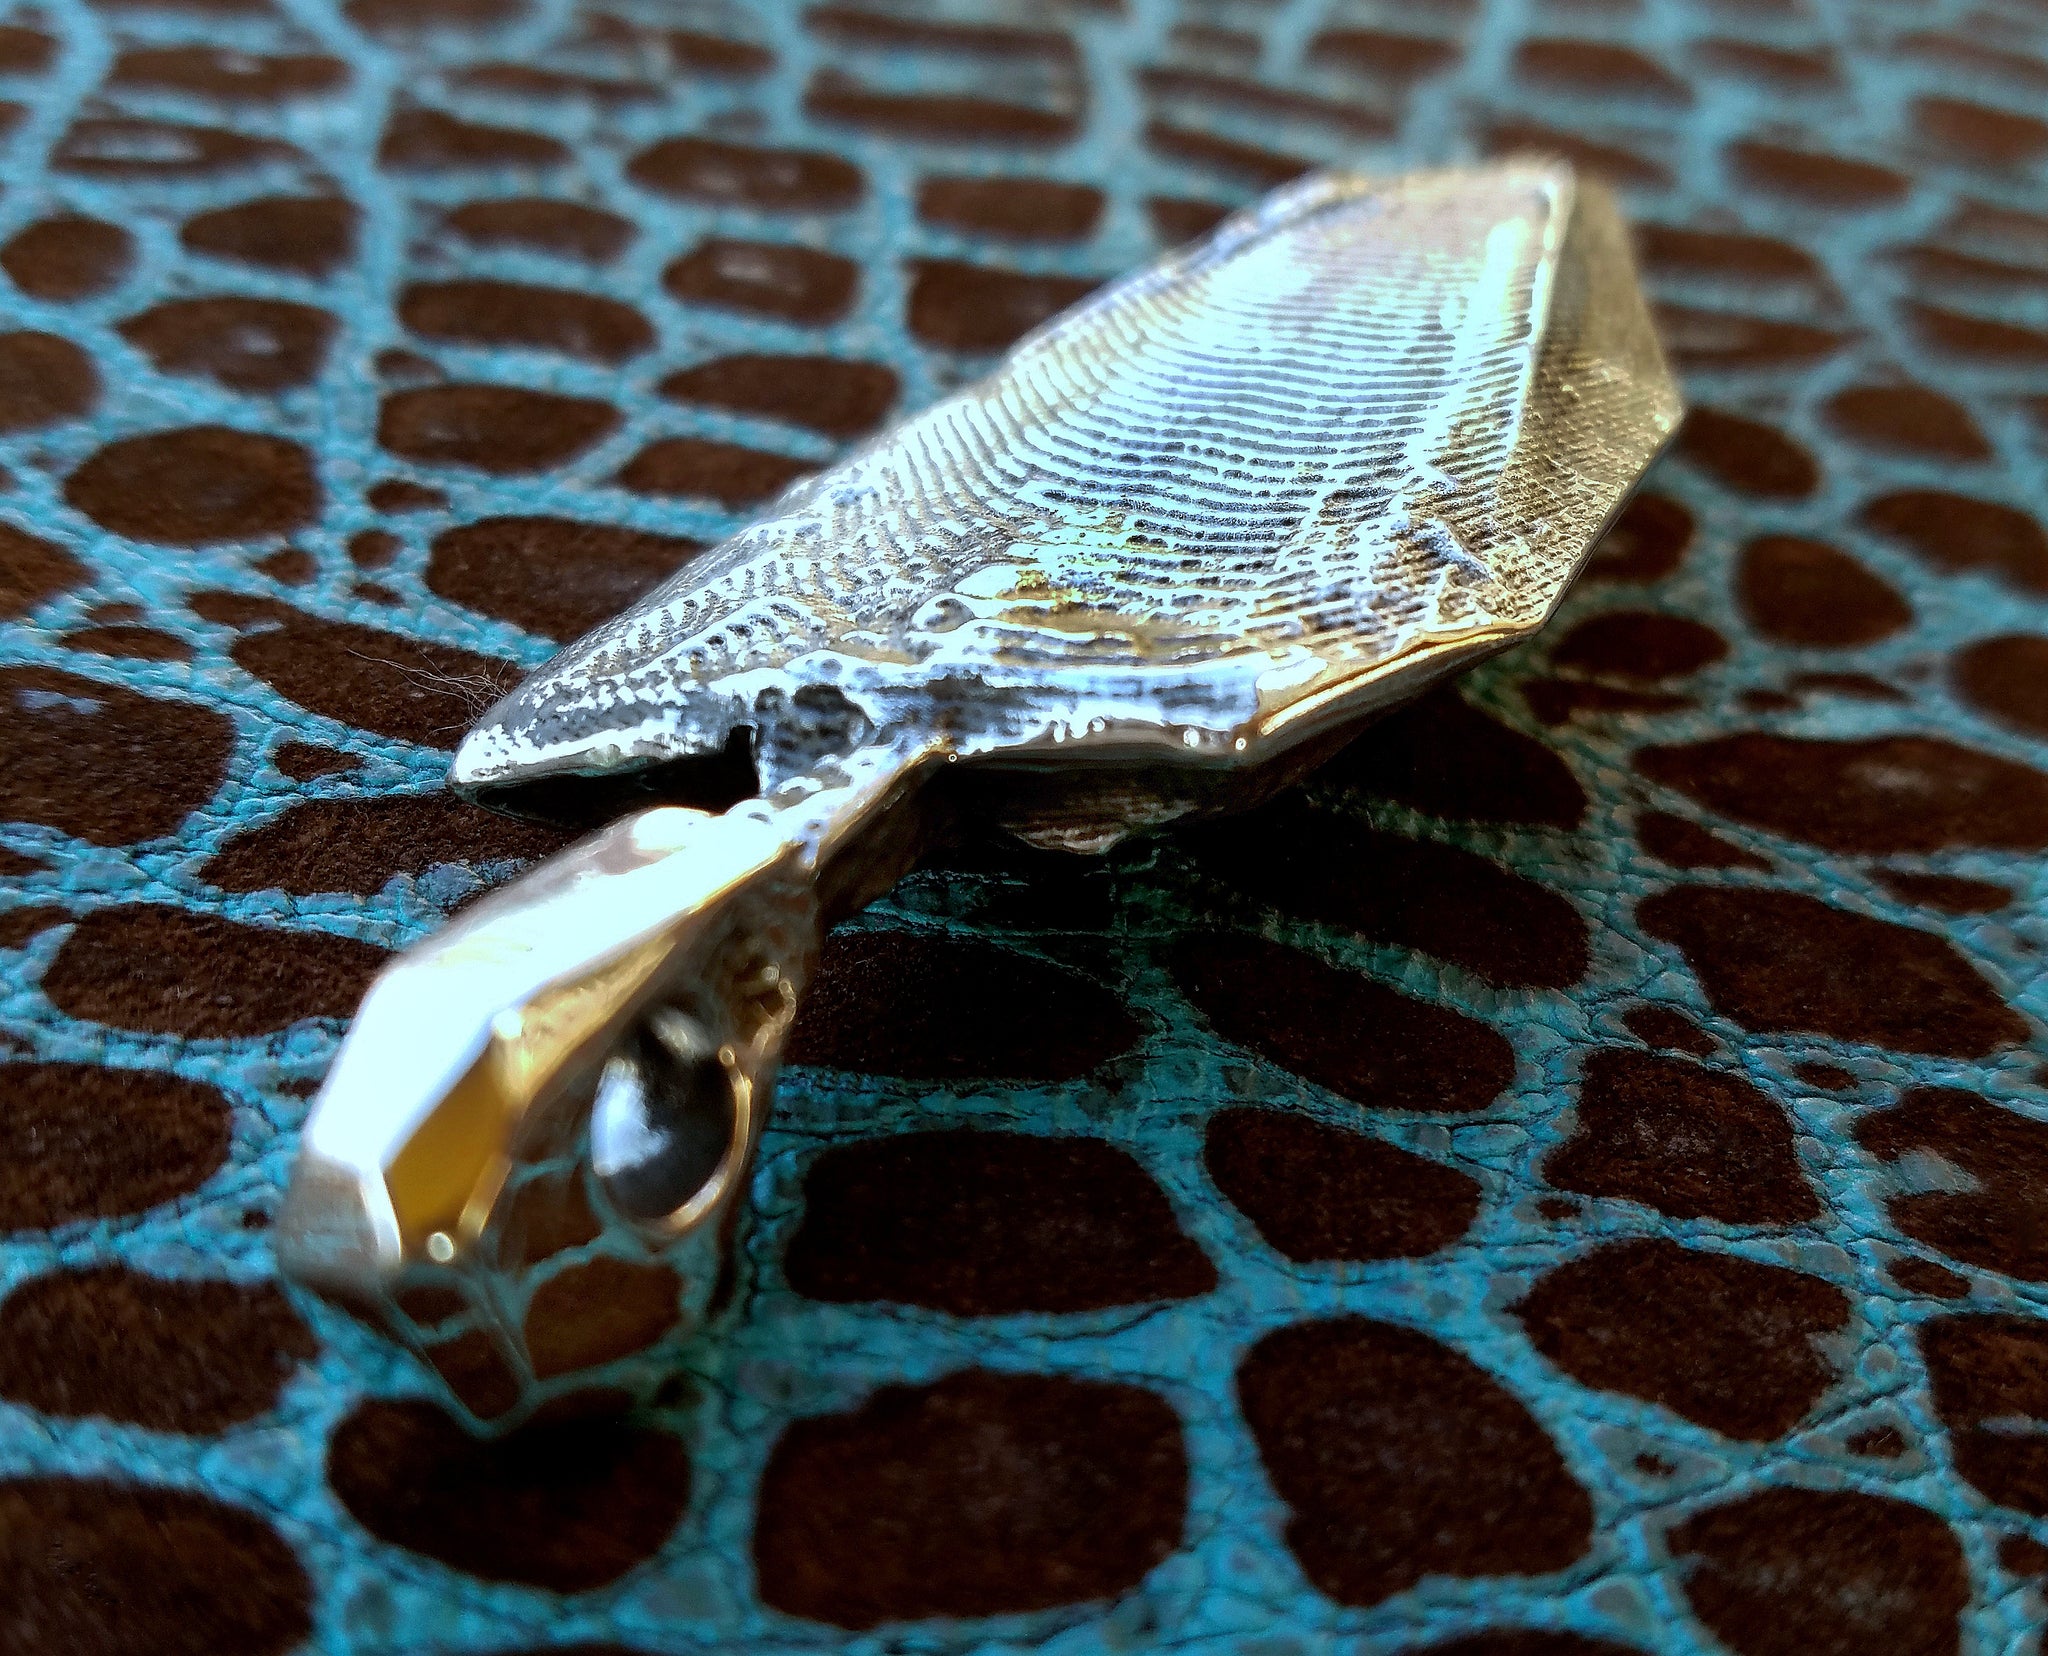 'Alien Artifact' Hand-carved Hand-poured Cuttlefish Cast Pendant #6 by Phantom